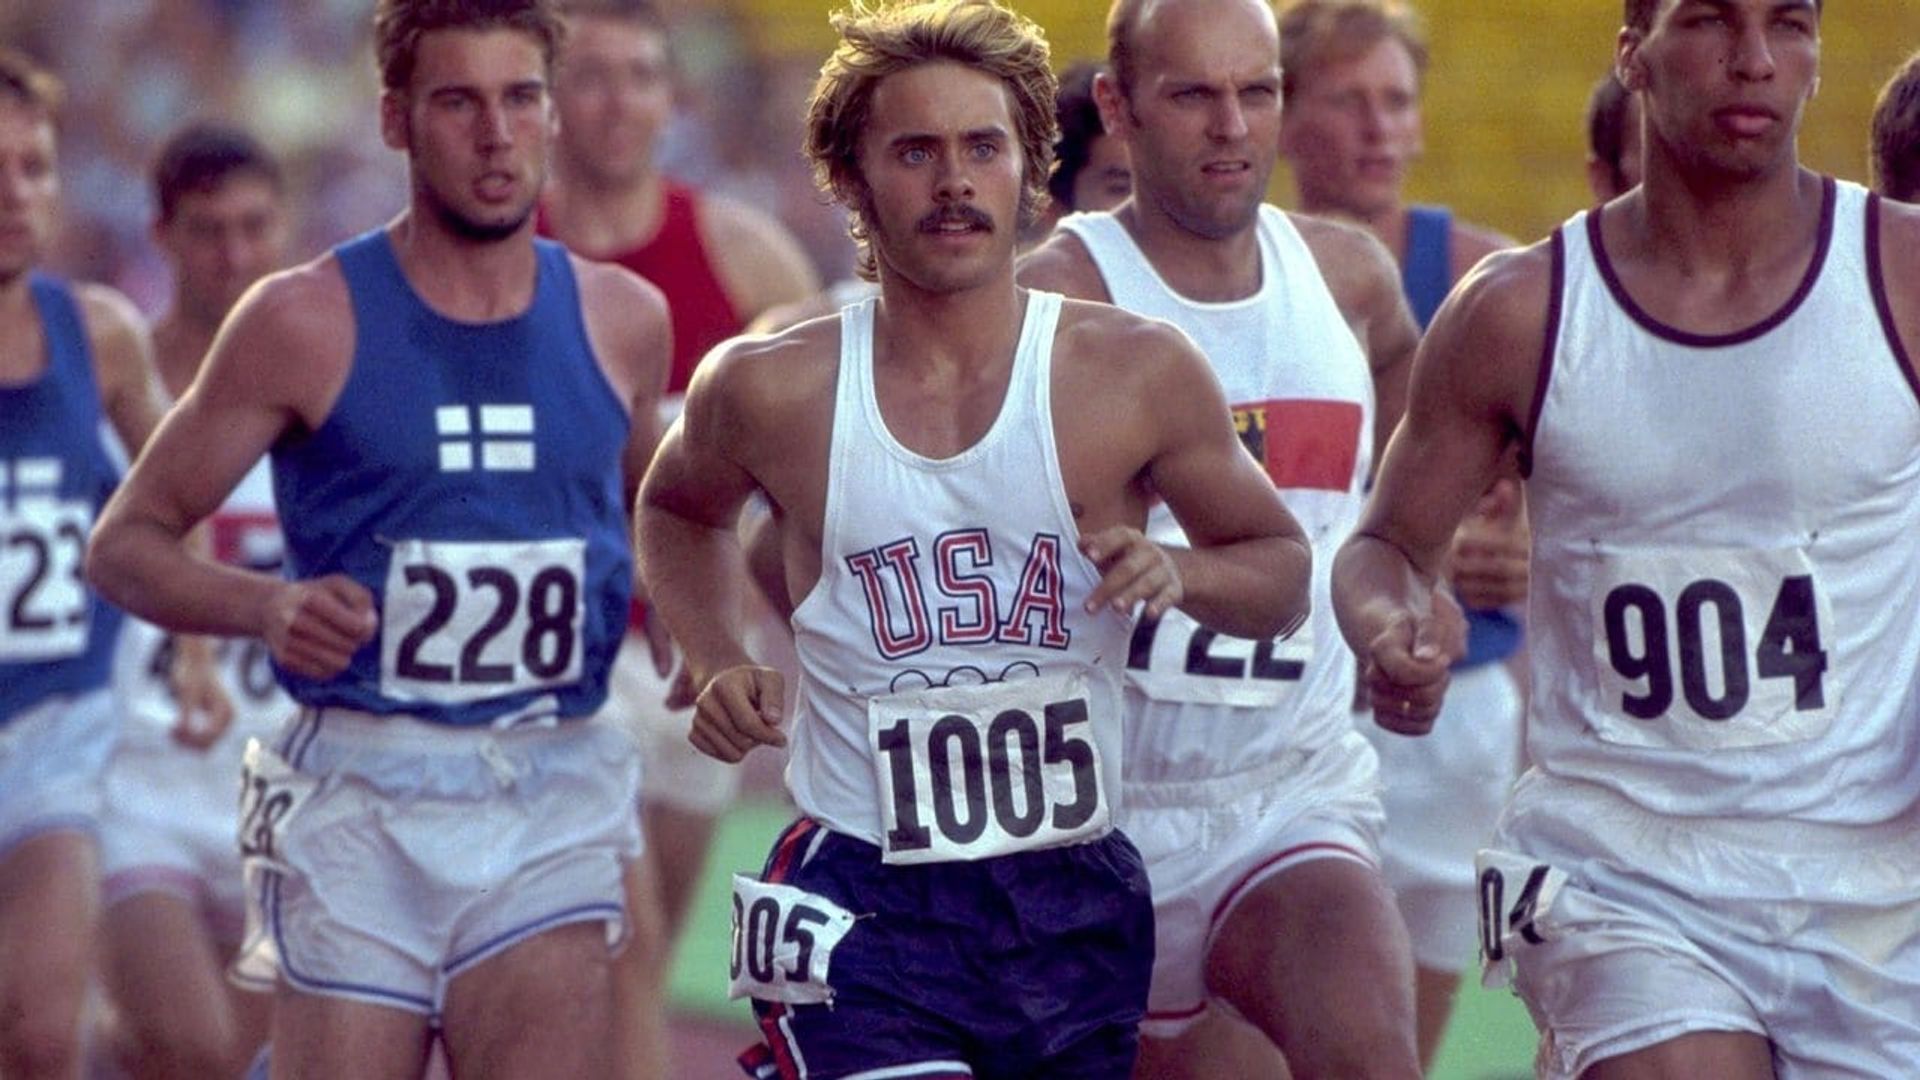 Prefontaine background